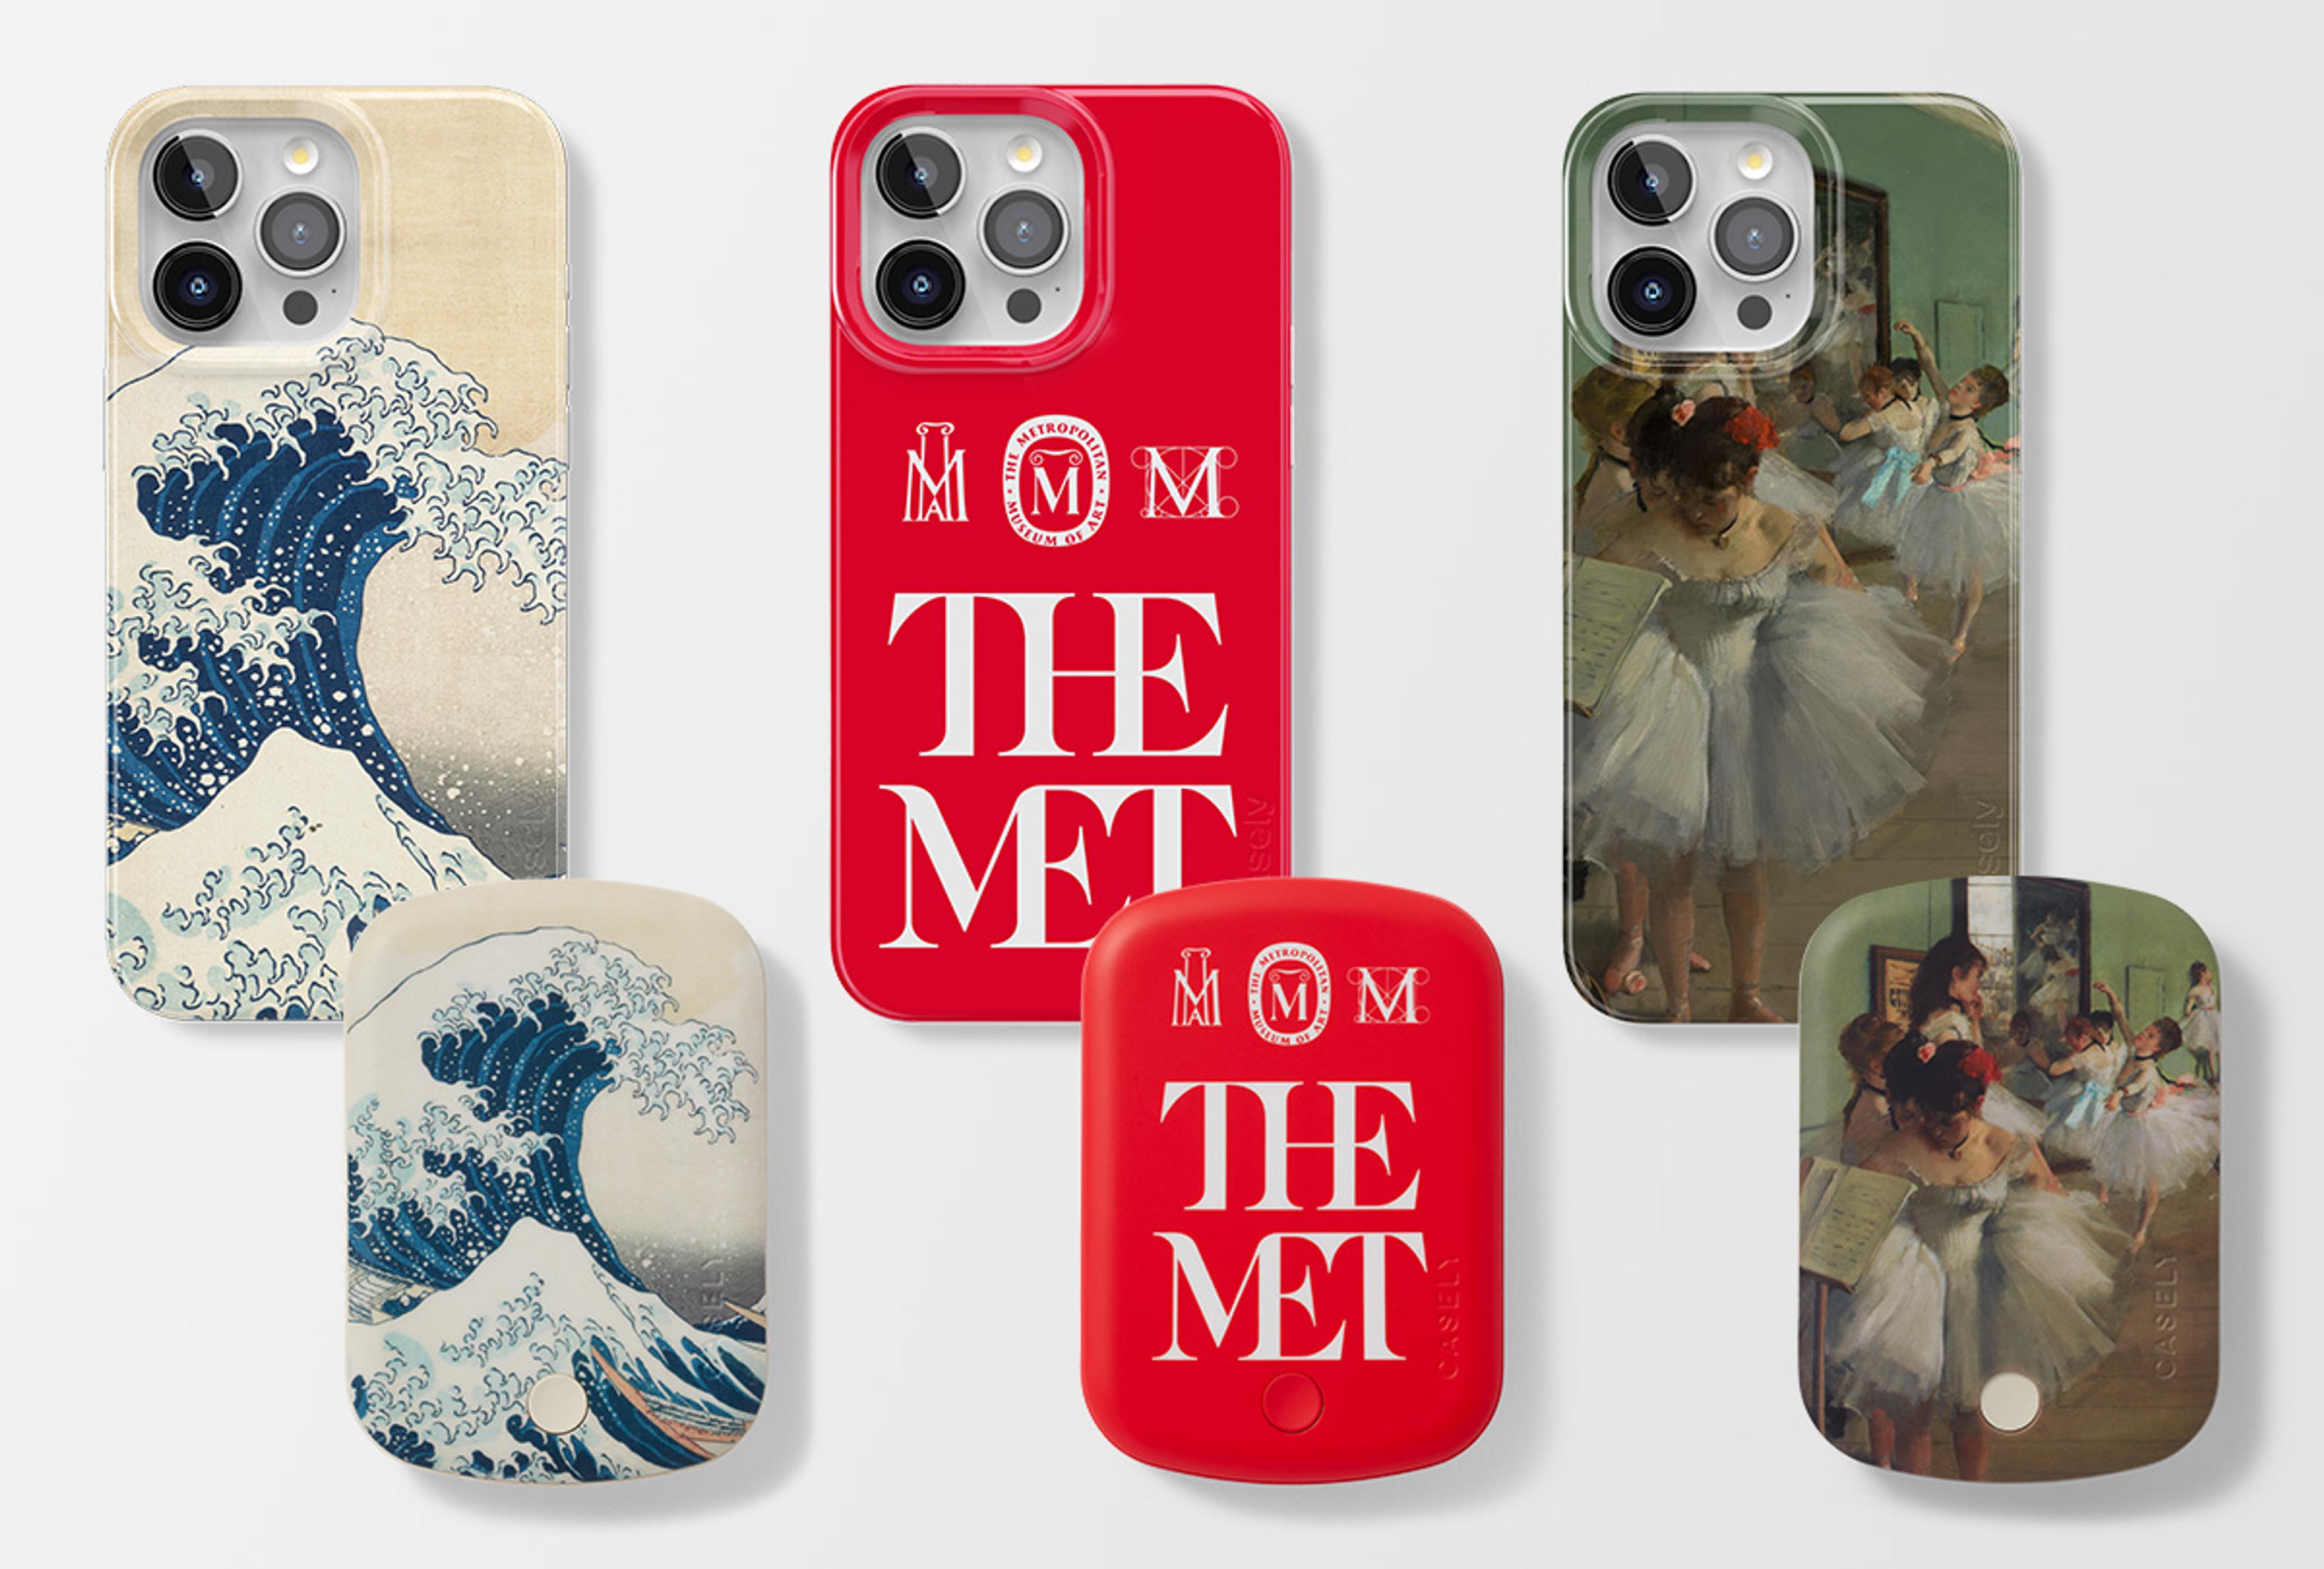 Three phone cases and power pods featuring "The Great Wave" The Met Logo and a painting by Edgar Degas of ballerinas.